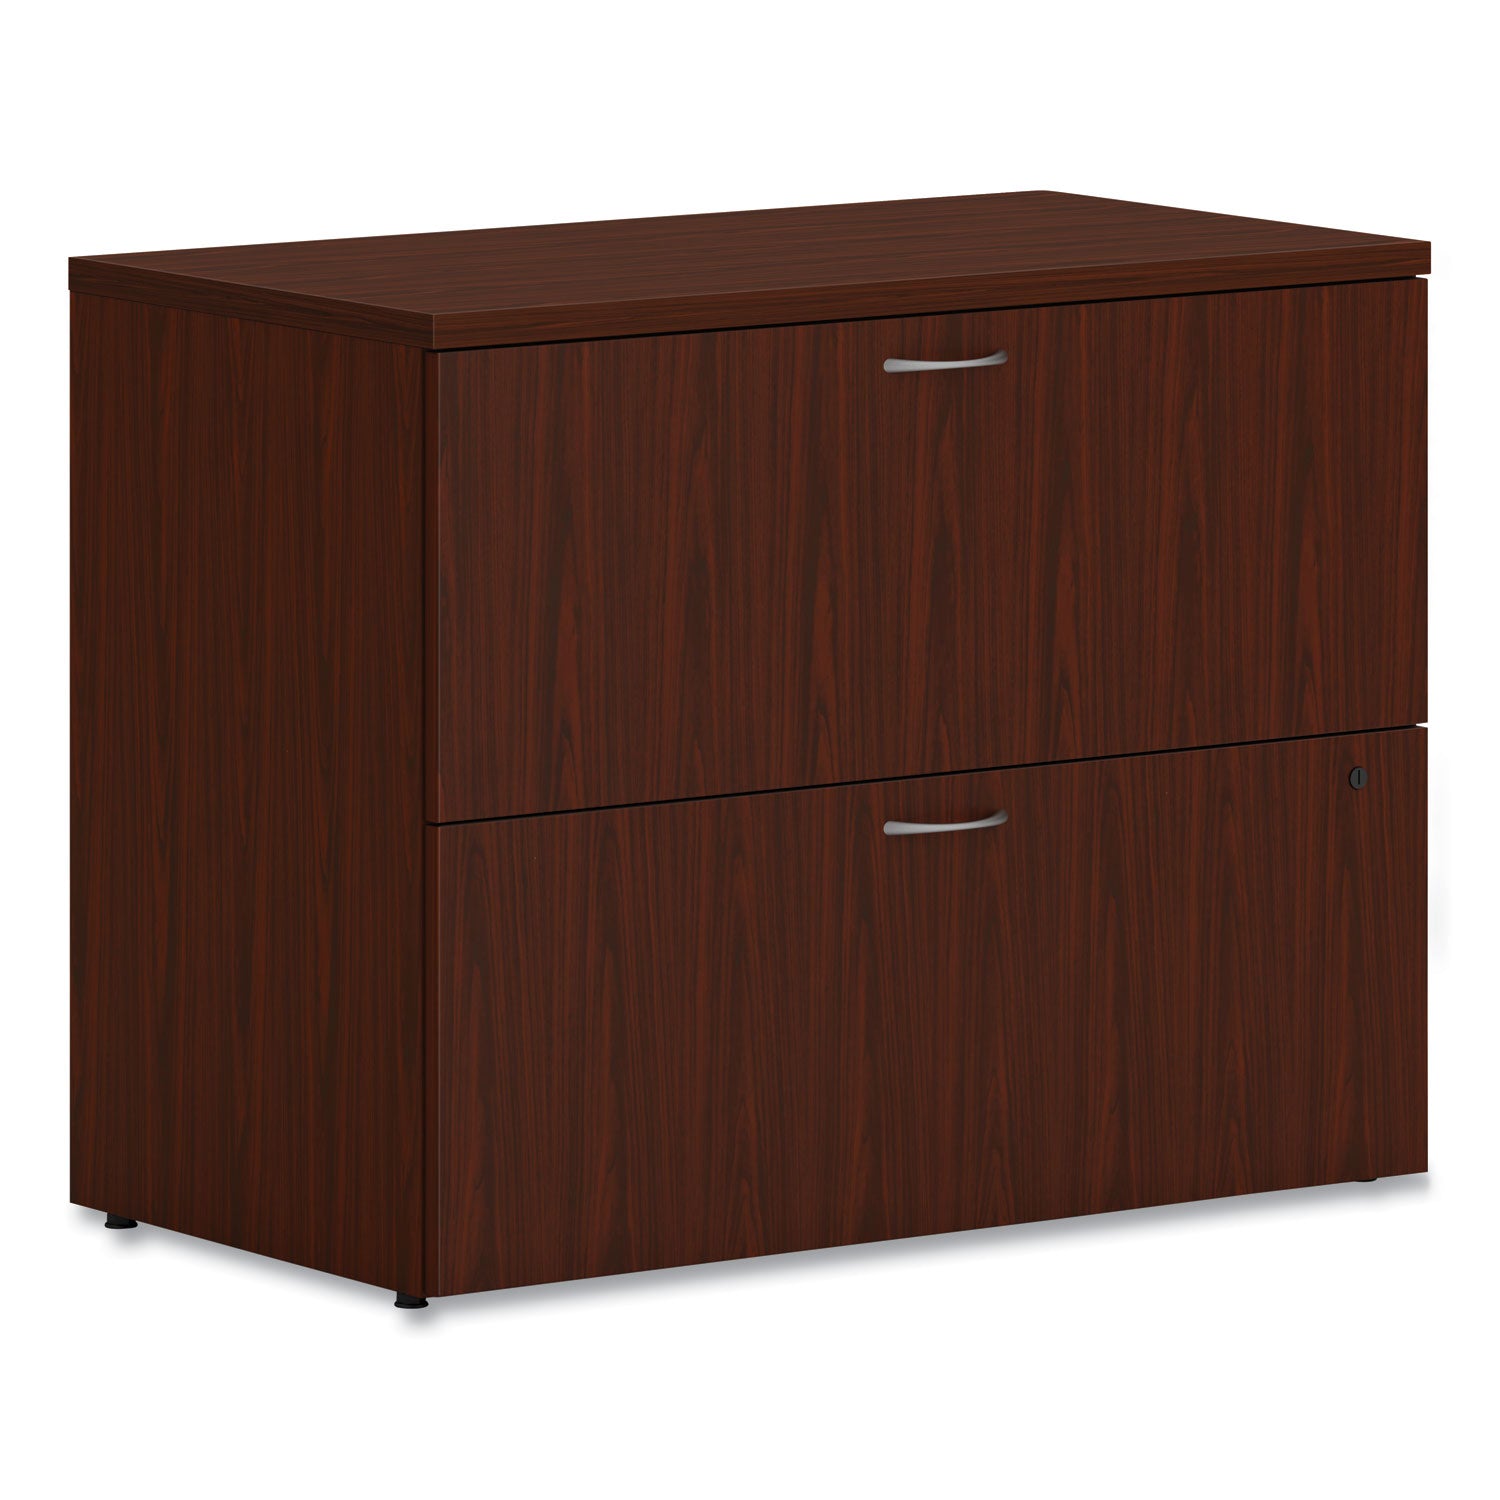 mod-lateral-file-2-legal-letter-size-file-drawers-traditional-mahogany-36-x-20-x-29_honllf3620l2lt1 - 1